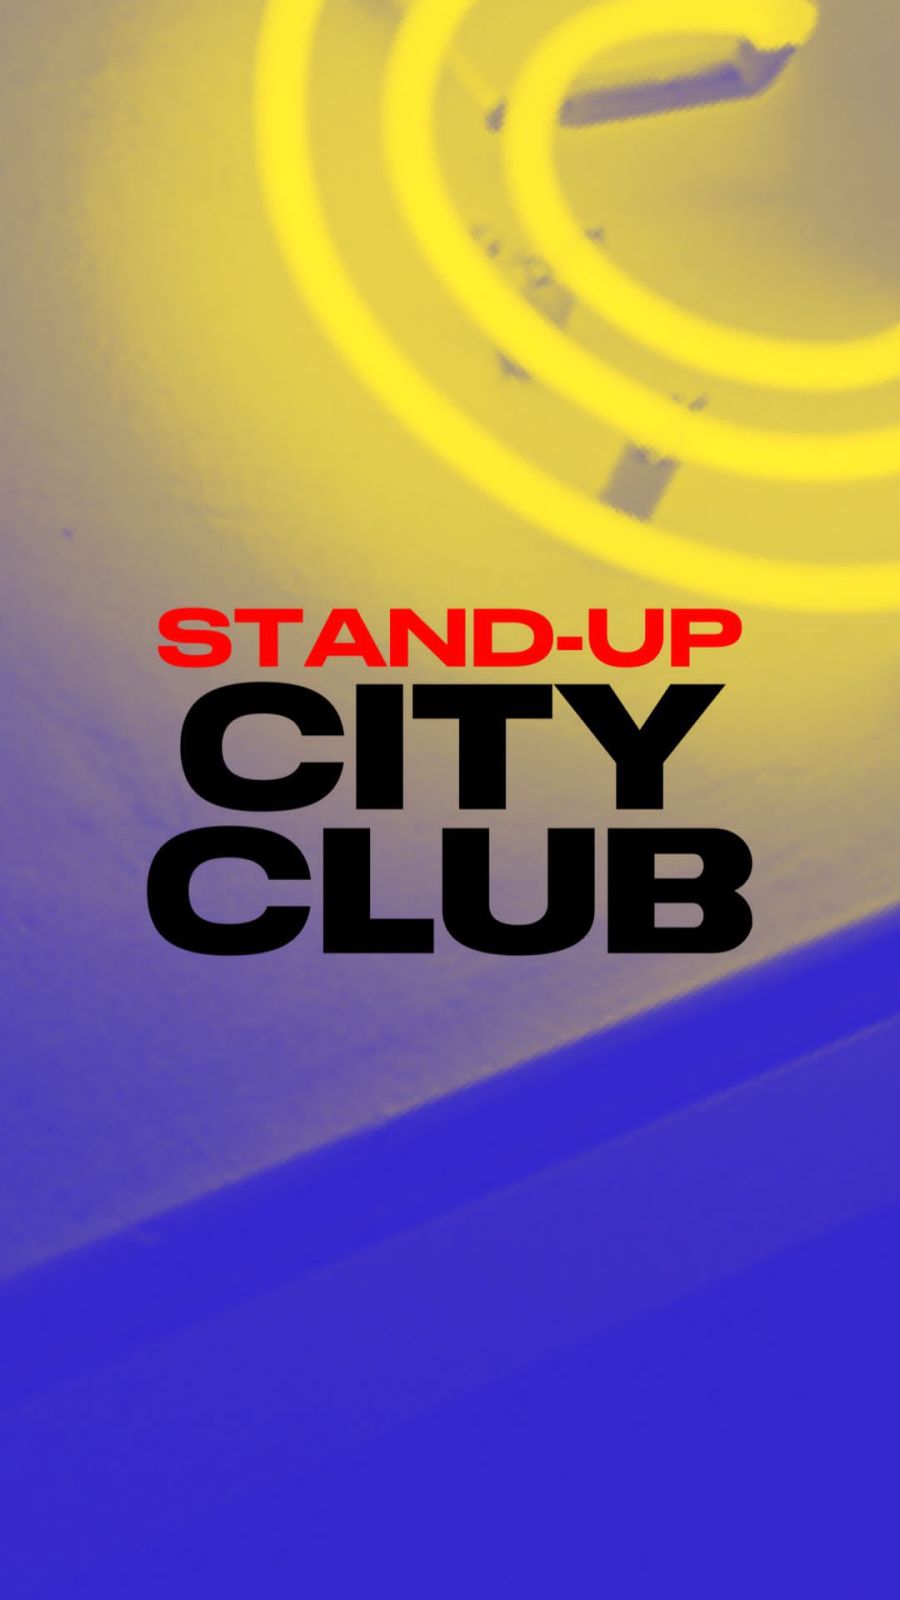 Stand-up City Club